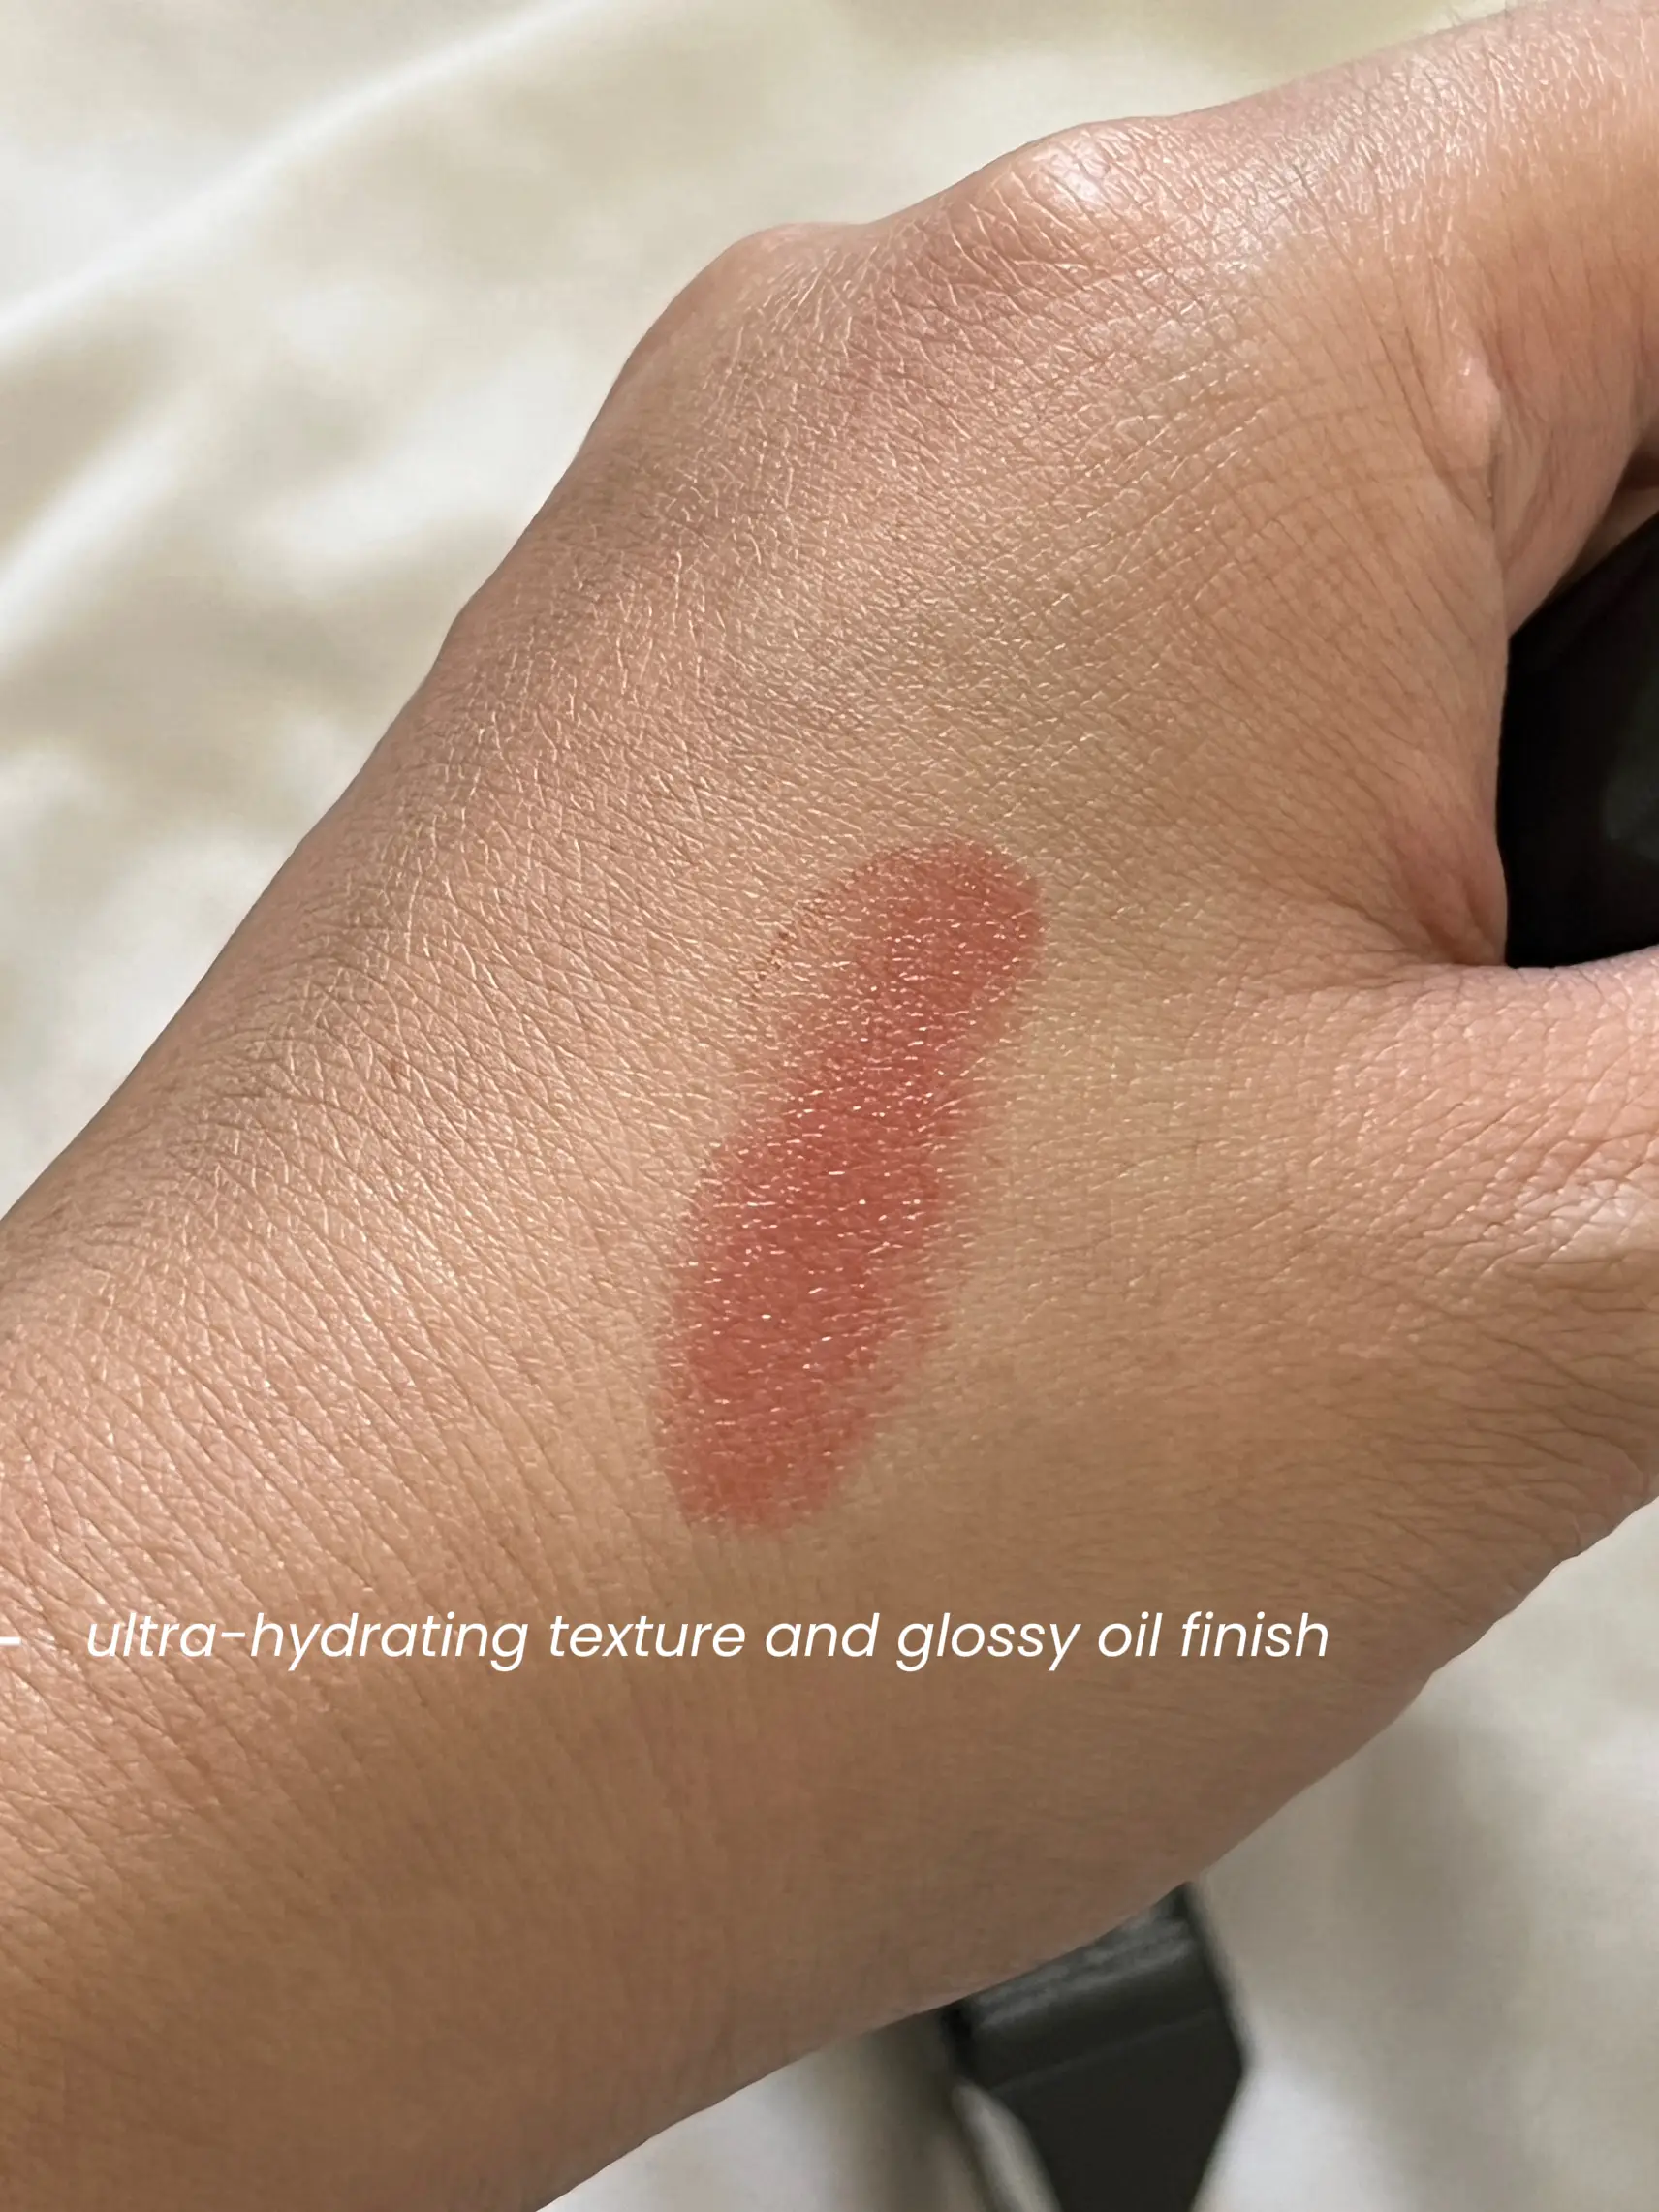 Chanel Rouge Coco Flash Lipstick  Gallery posted by Syasya Adlina